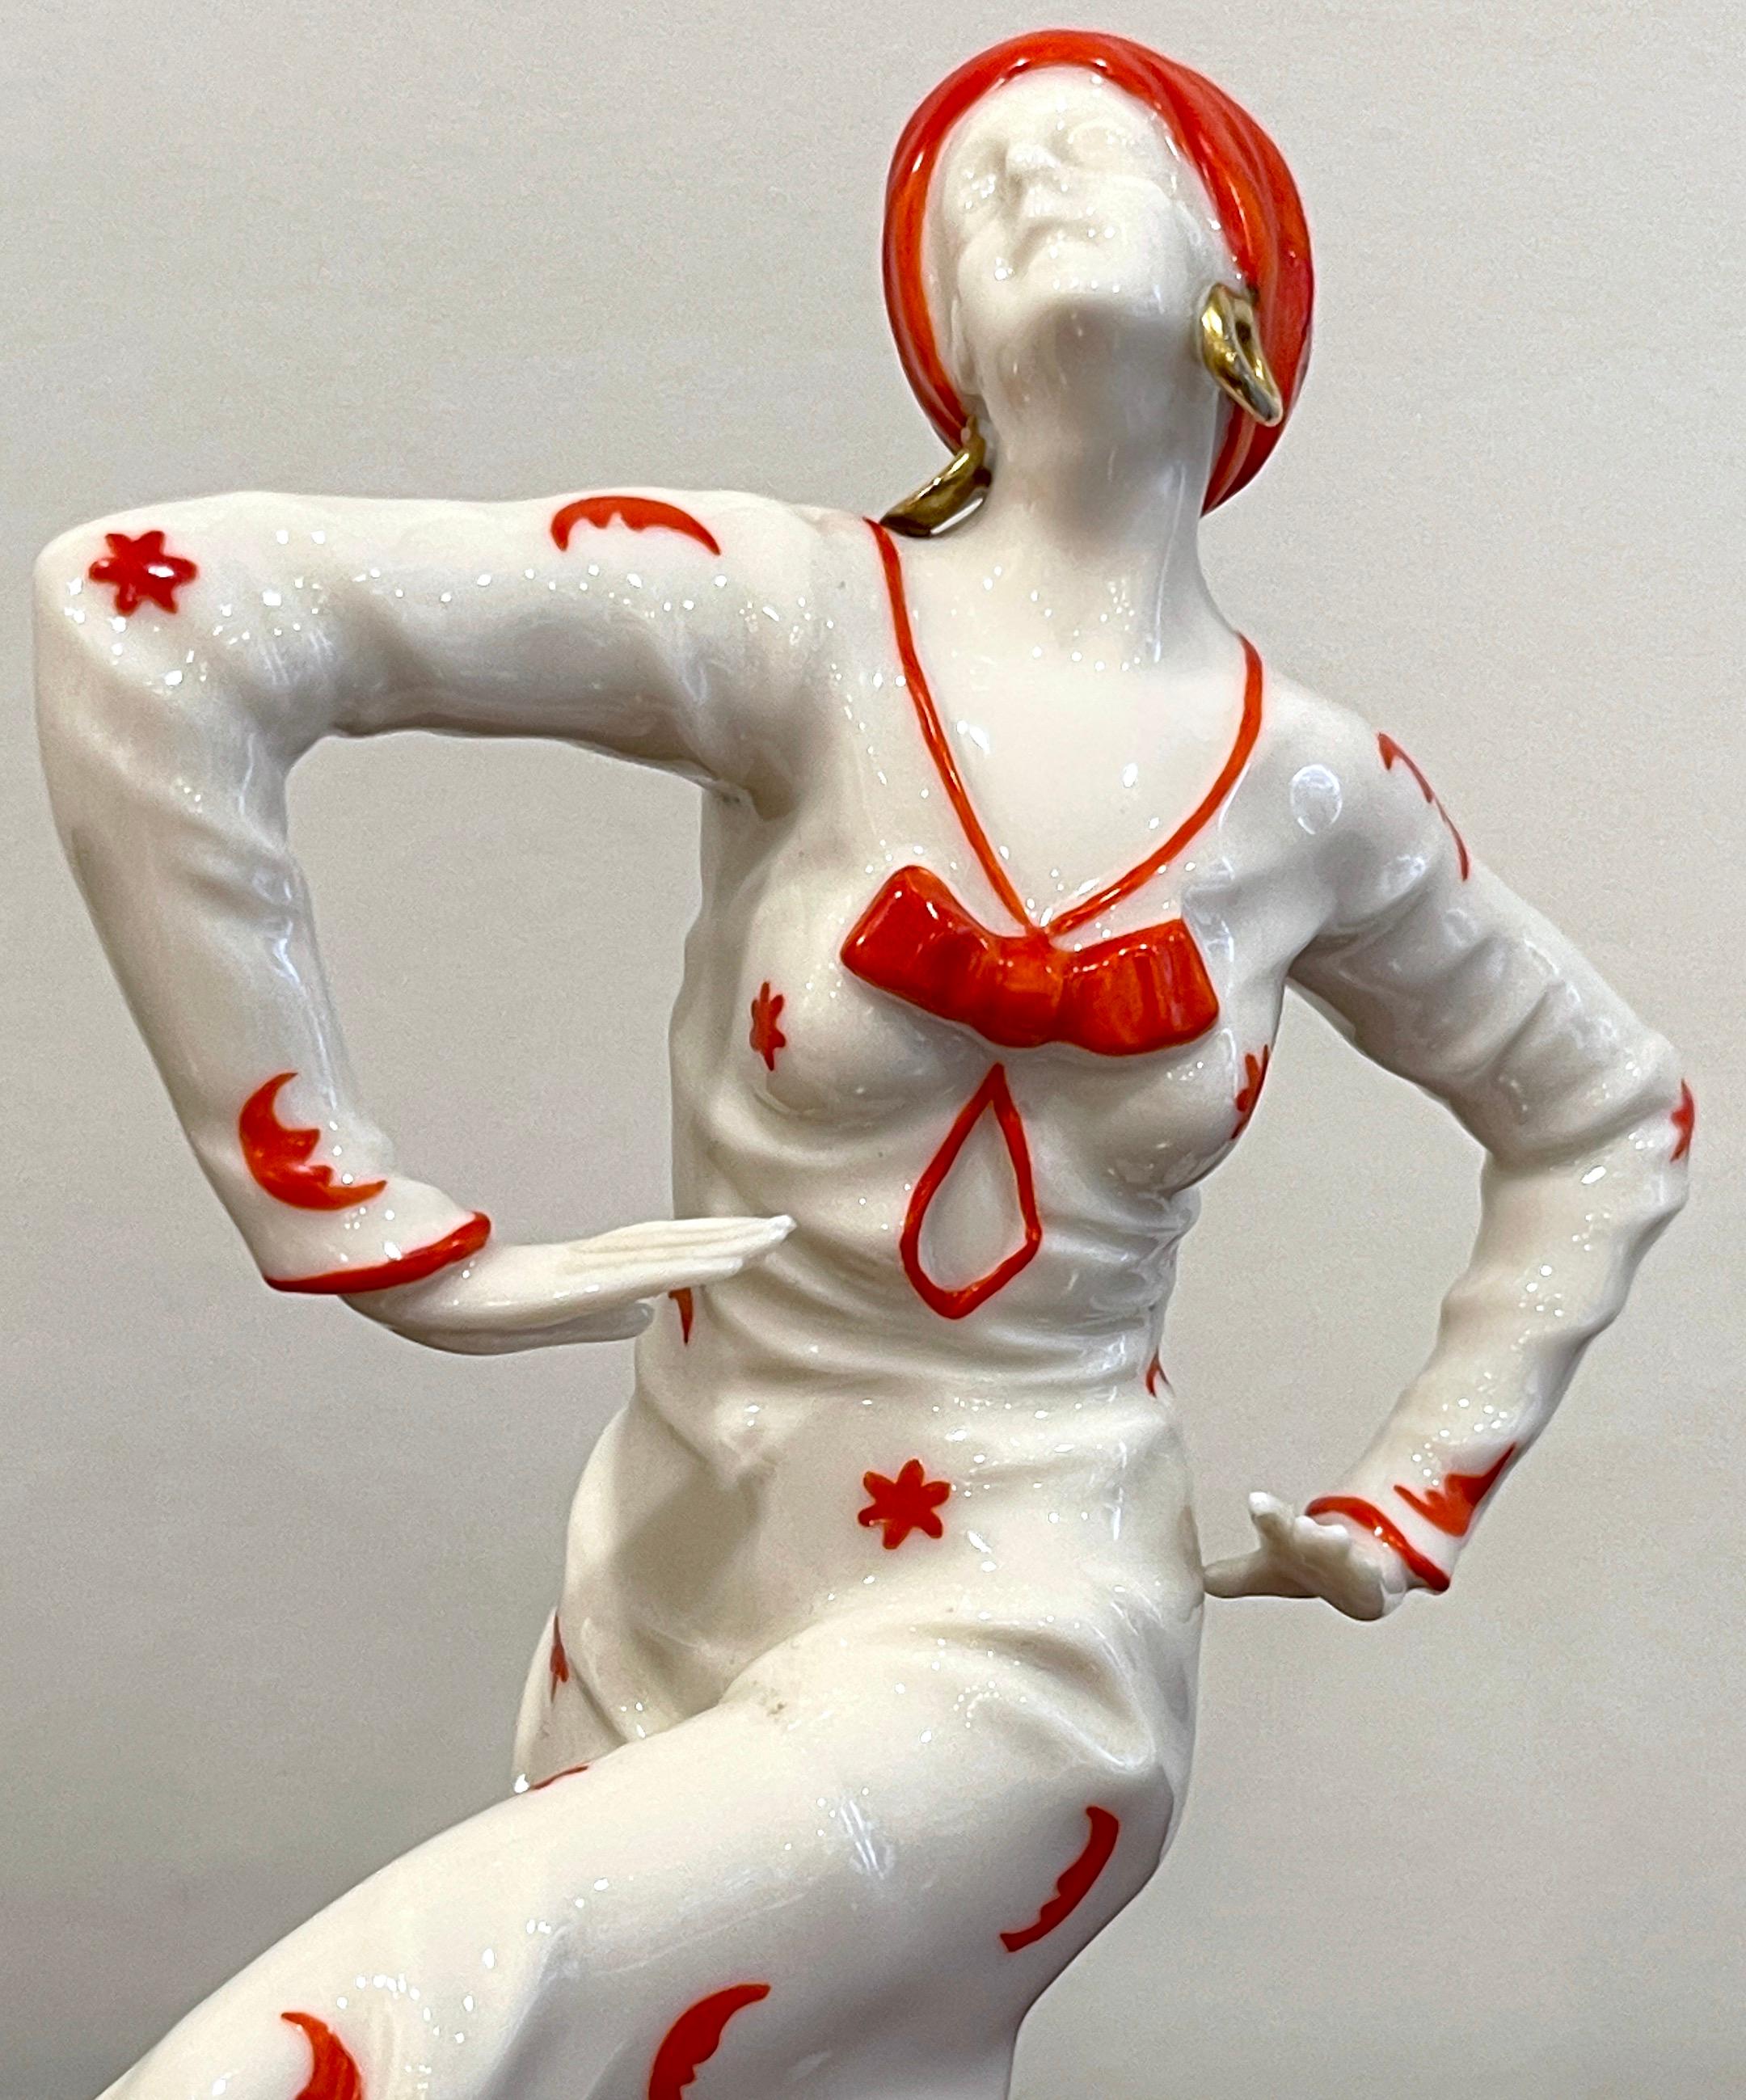 Art Deco Figurine of 'Mata Hari' by Capodimonte / Naples Porcelain Company In Good Condition For Sale In West Palm Beach, FL